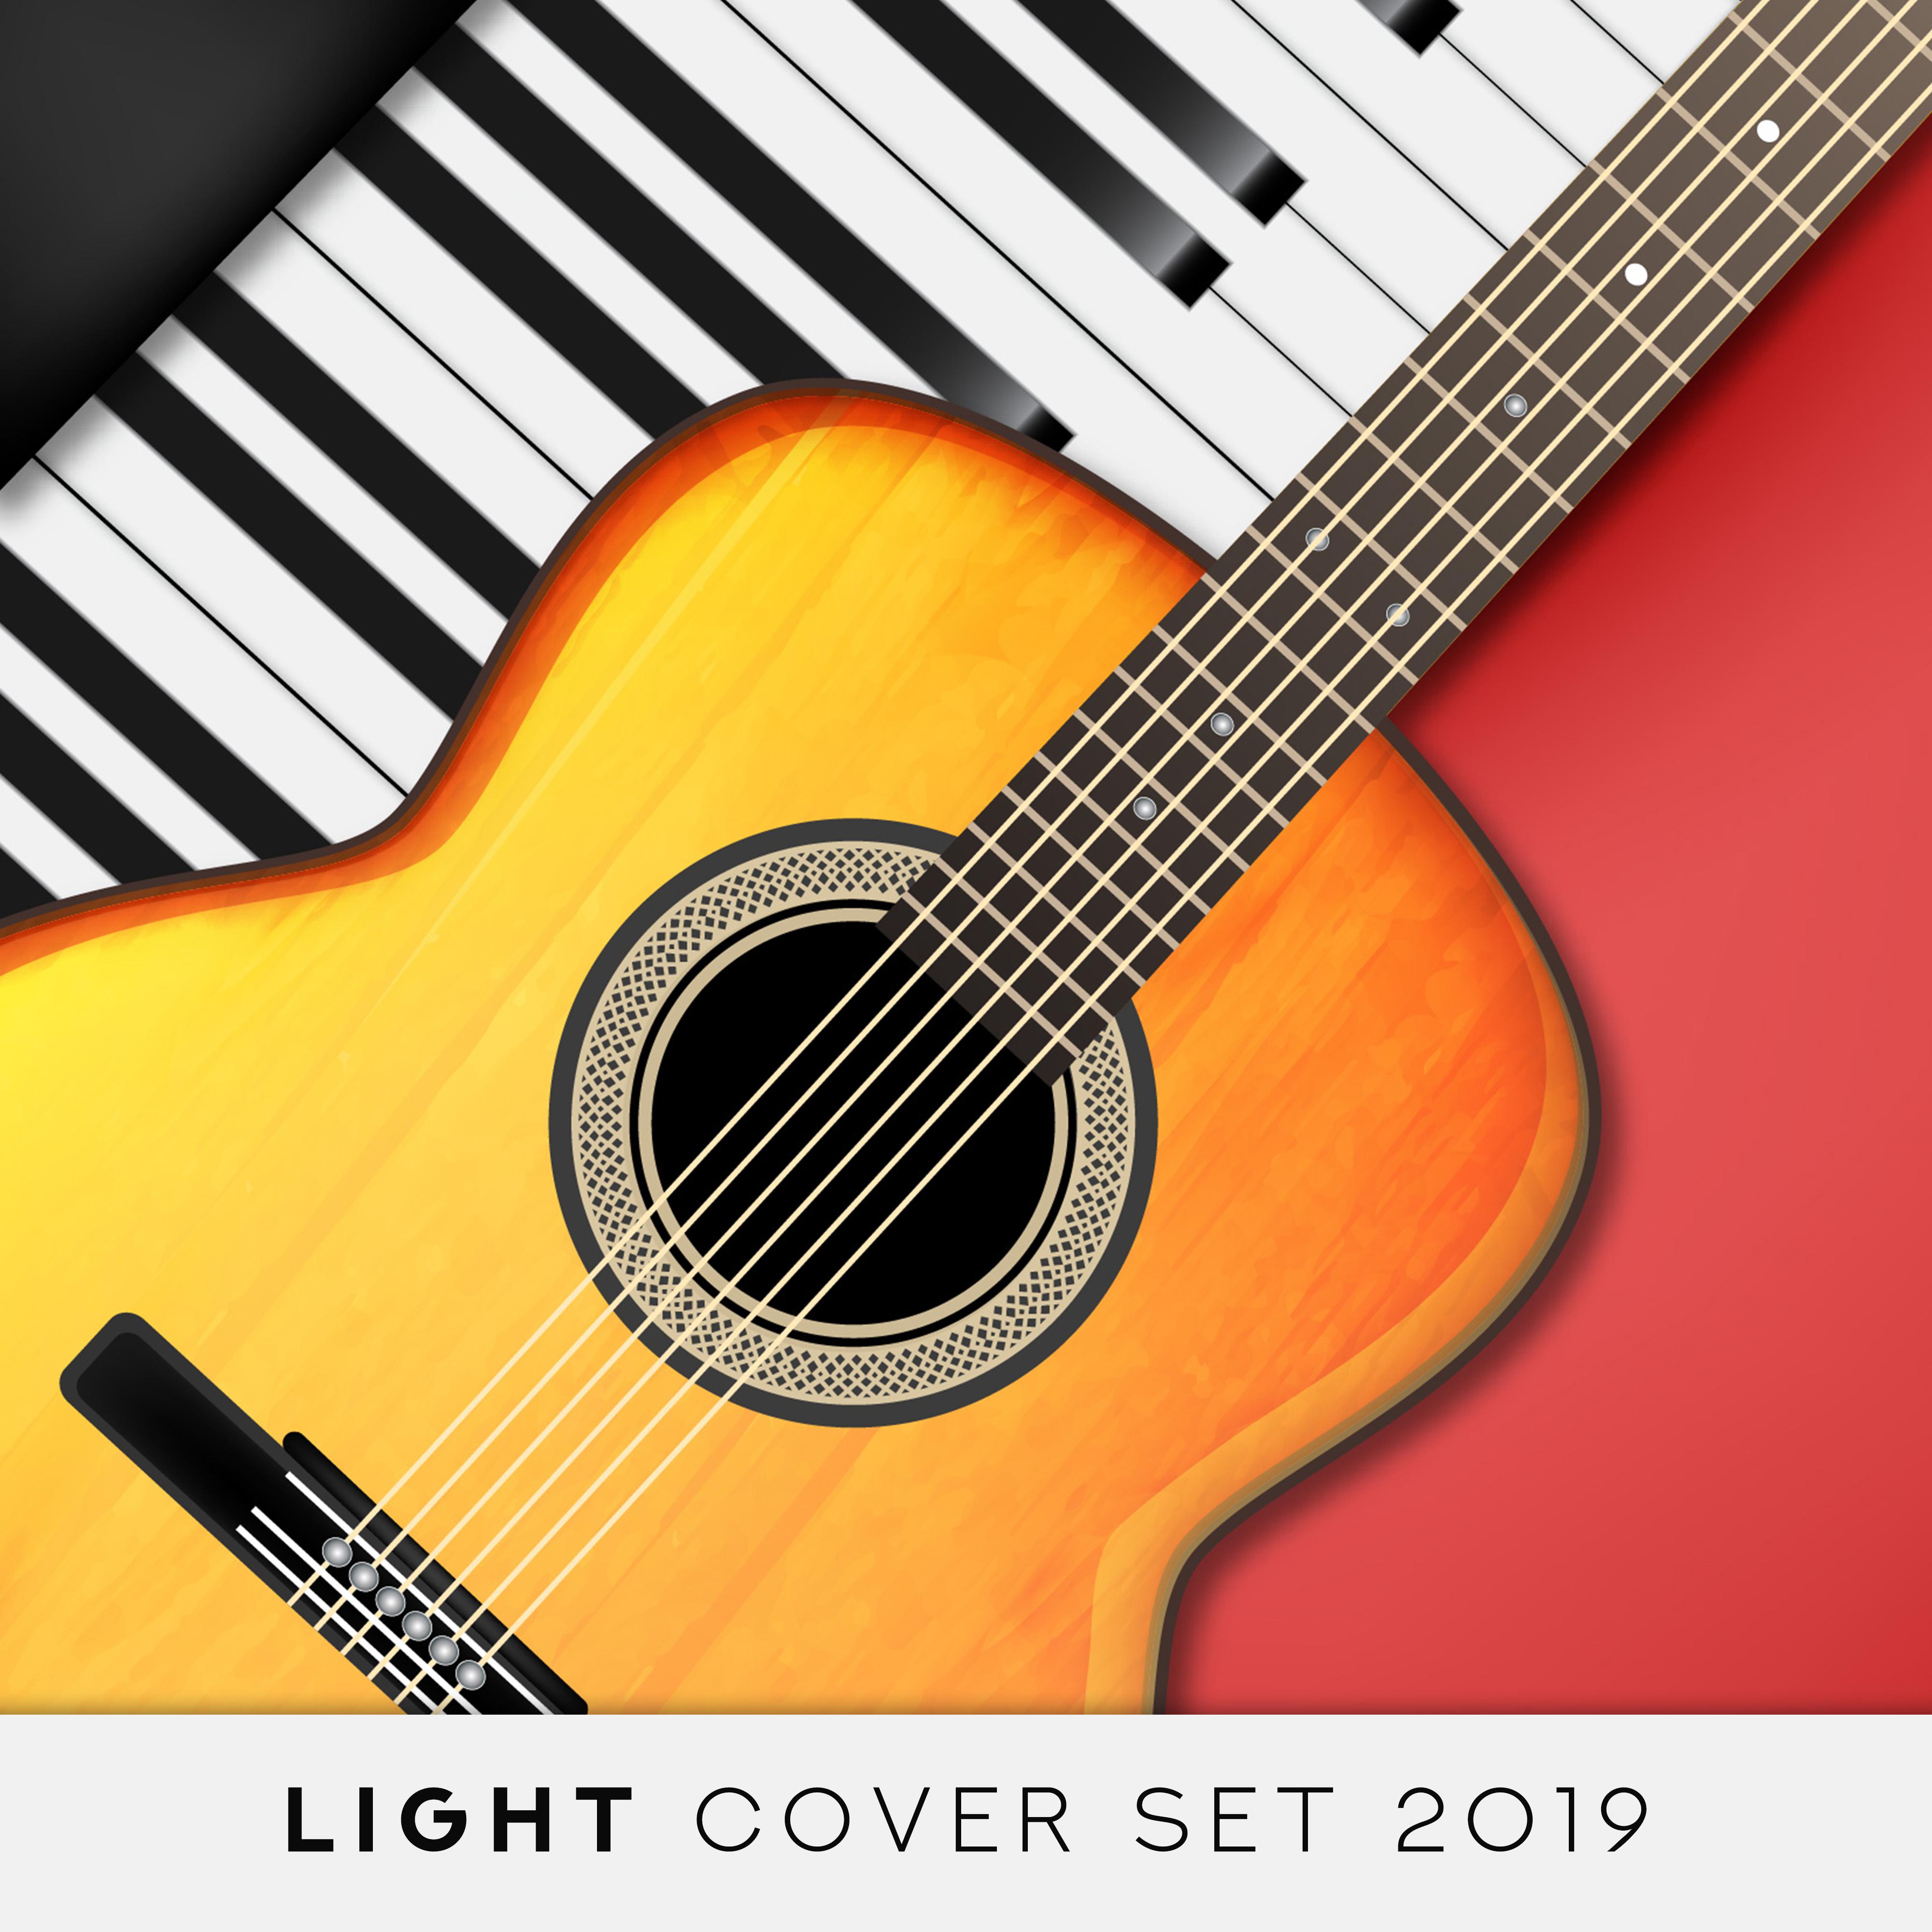 Light Cover Set 2019 – Instrumental Covers of Known Pop & Classic Melodies Played on Piano & Guitar